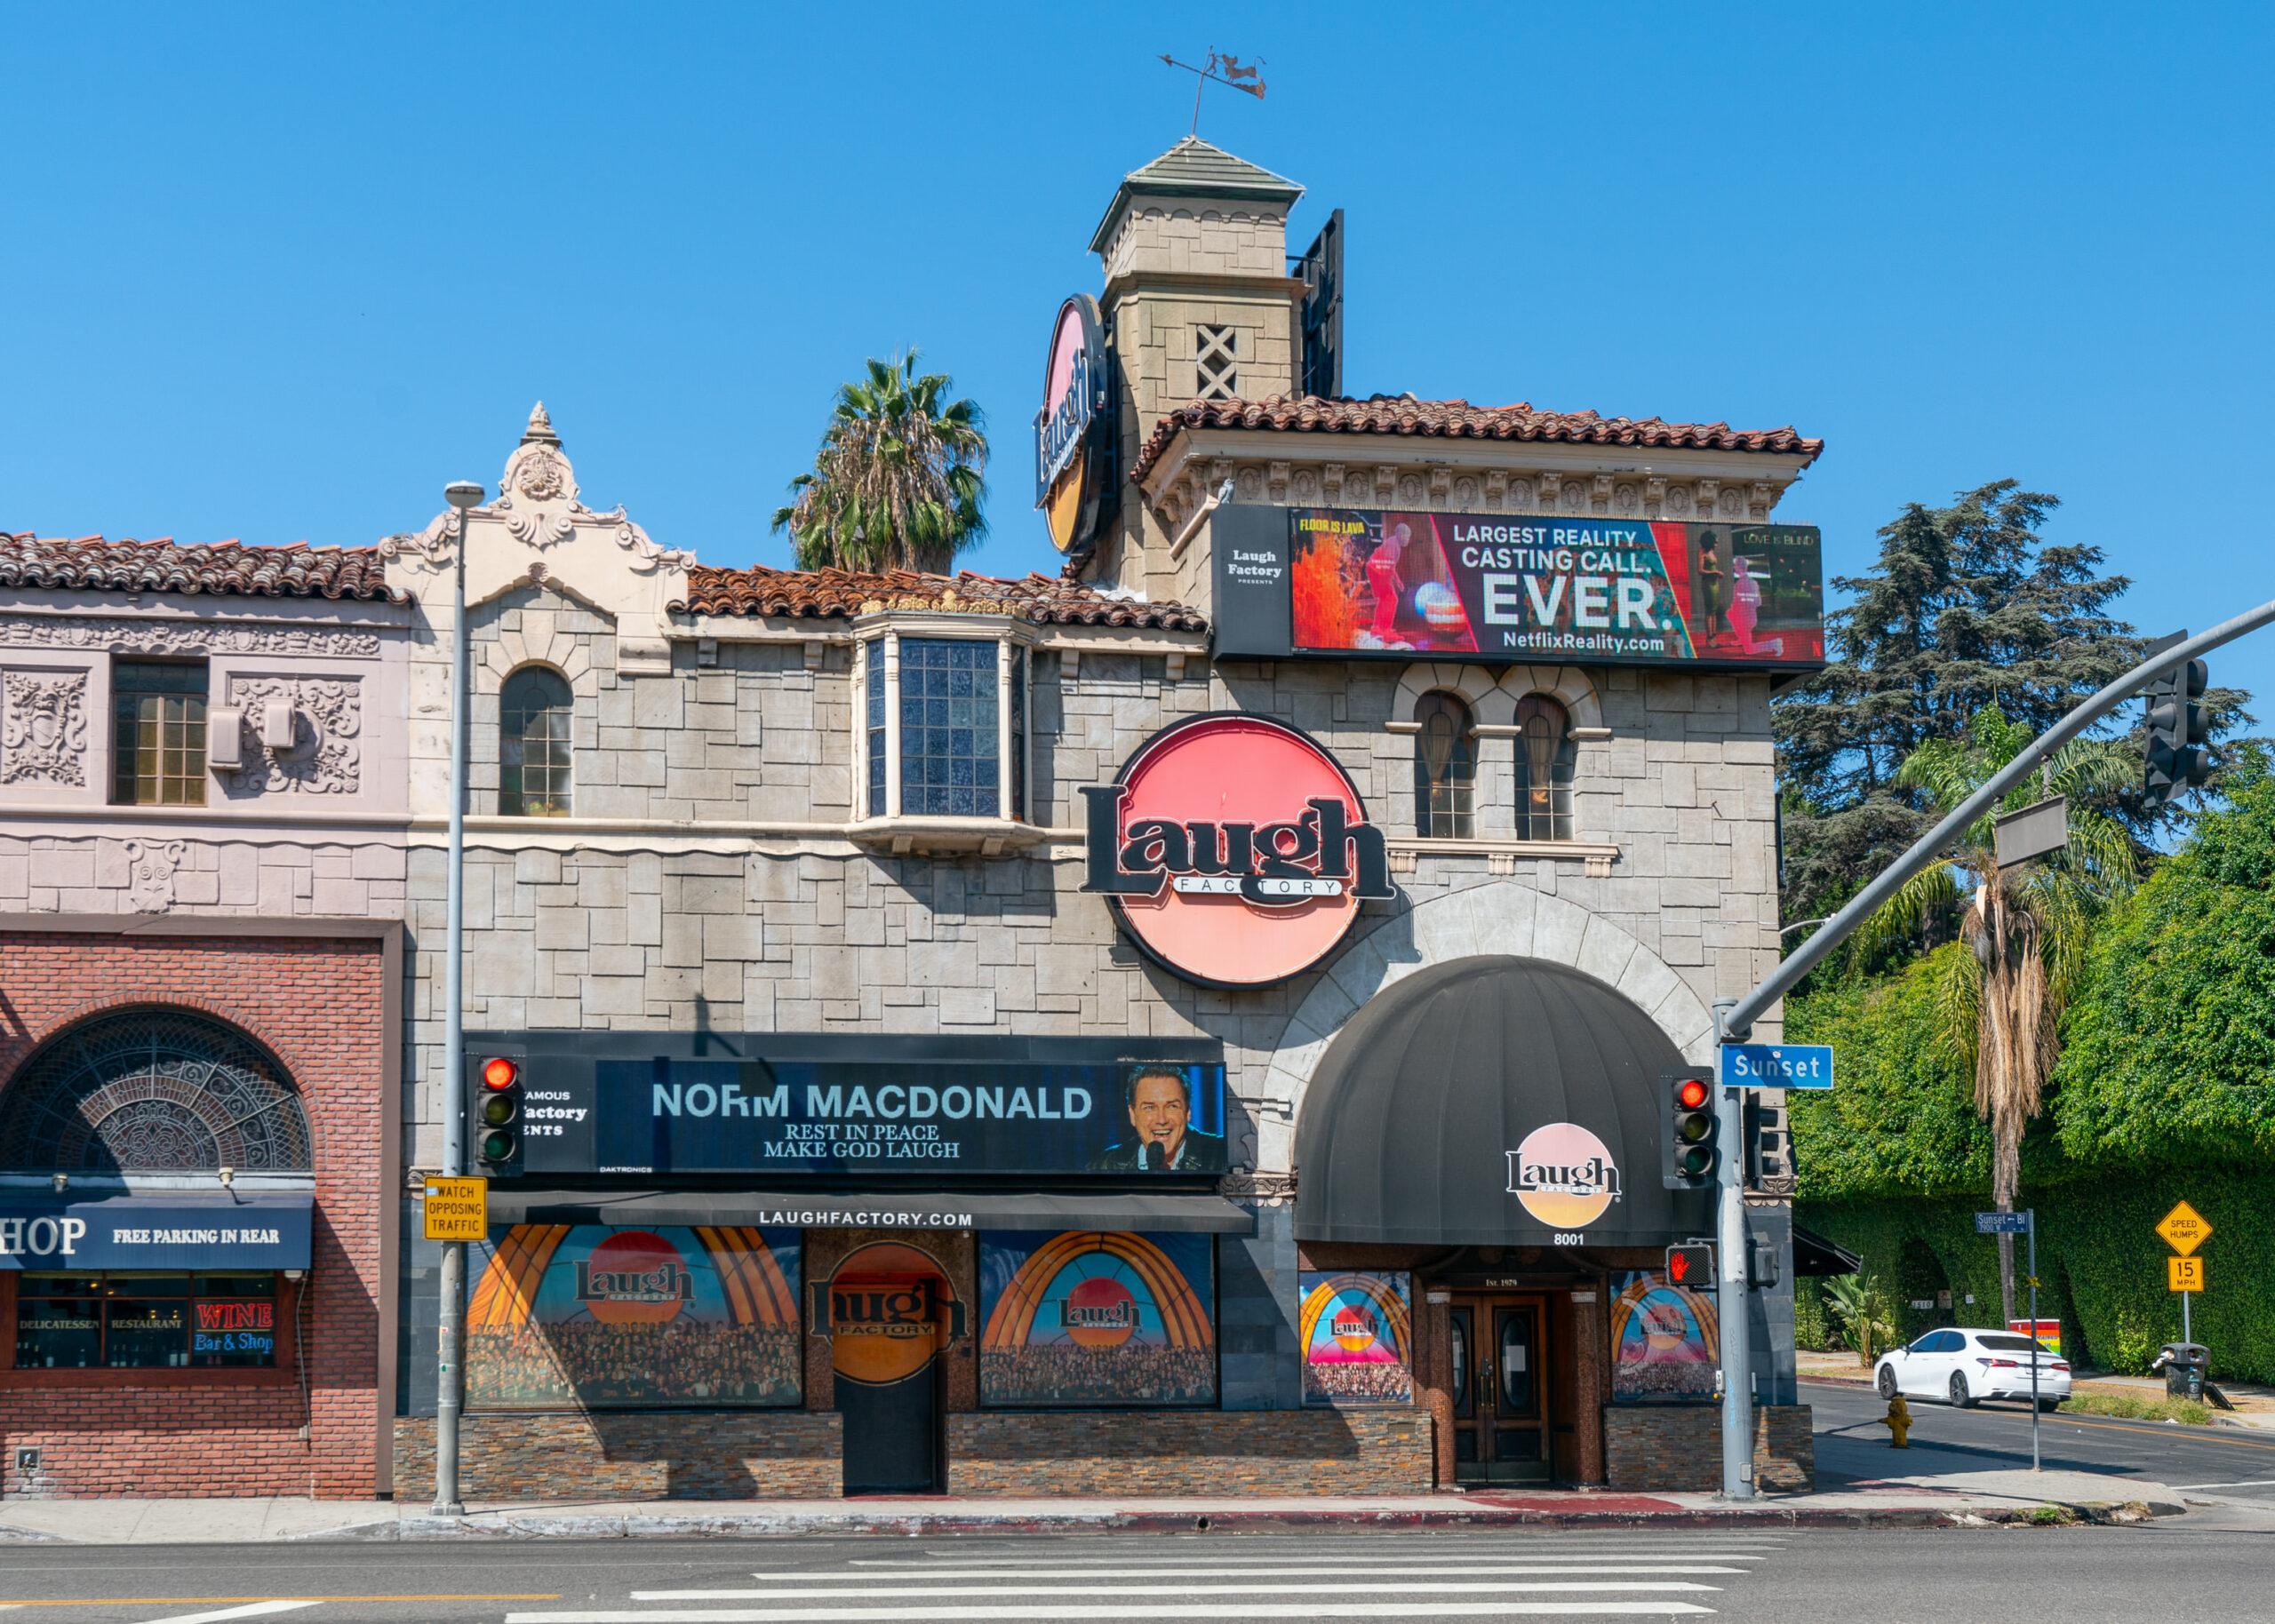 The Laugh Factory in Hollywood honors Norm Macdonald